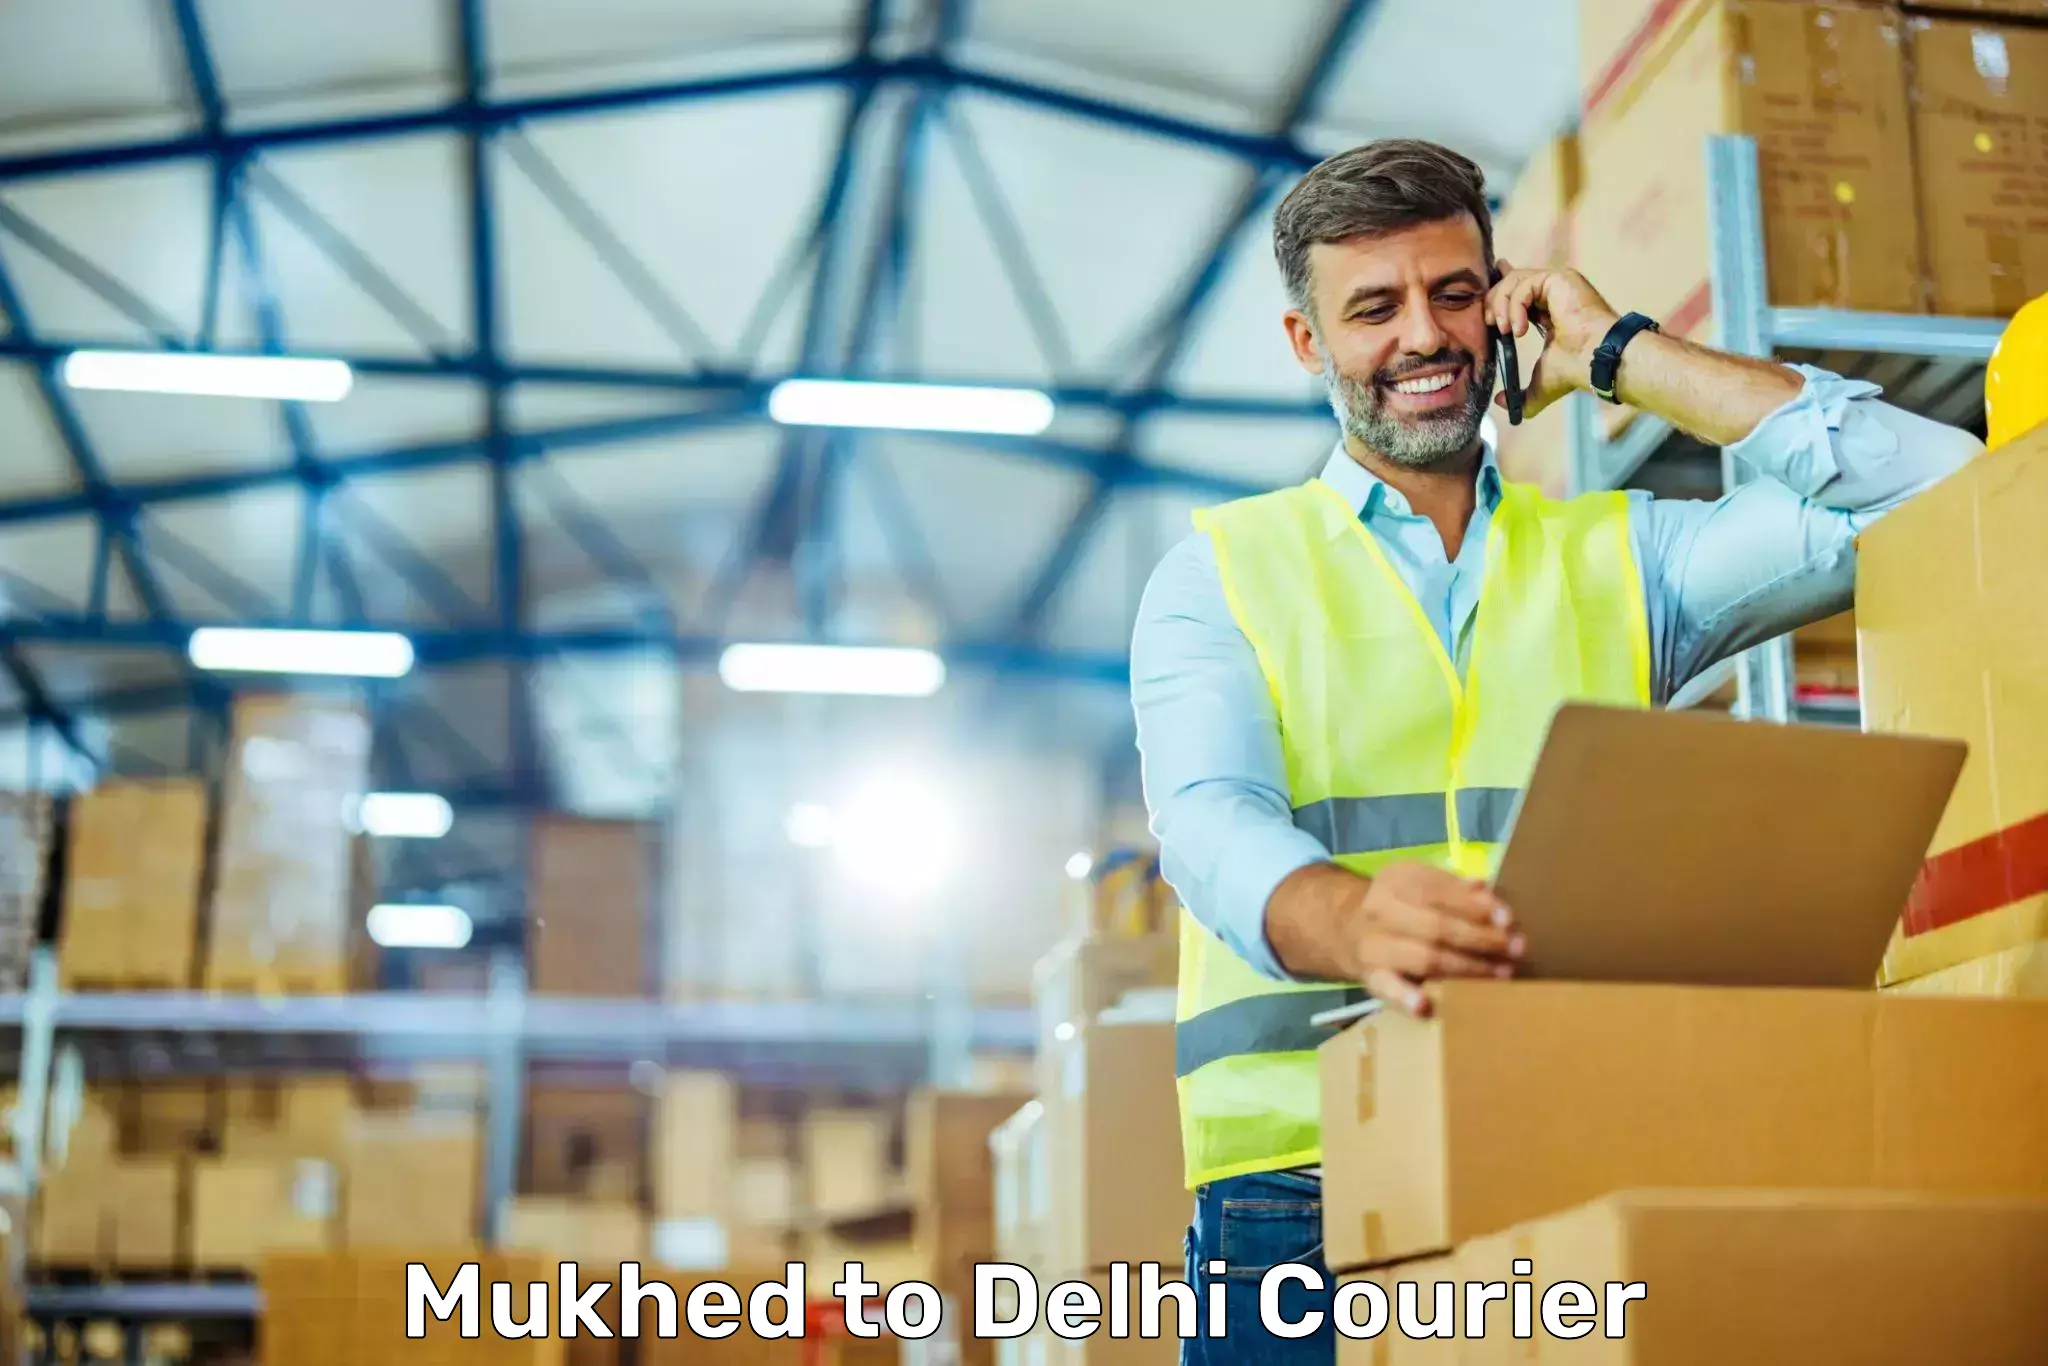 State-of-the-art courier technology Mukhed to IIT Delhi